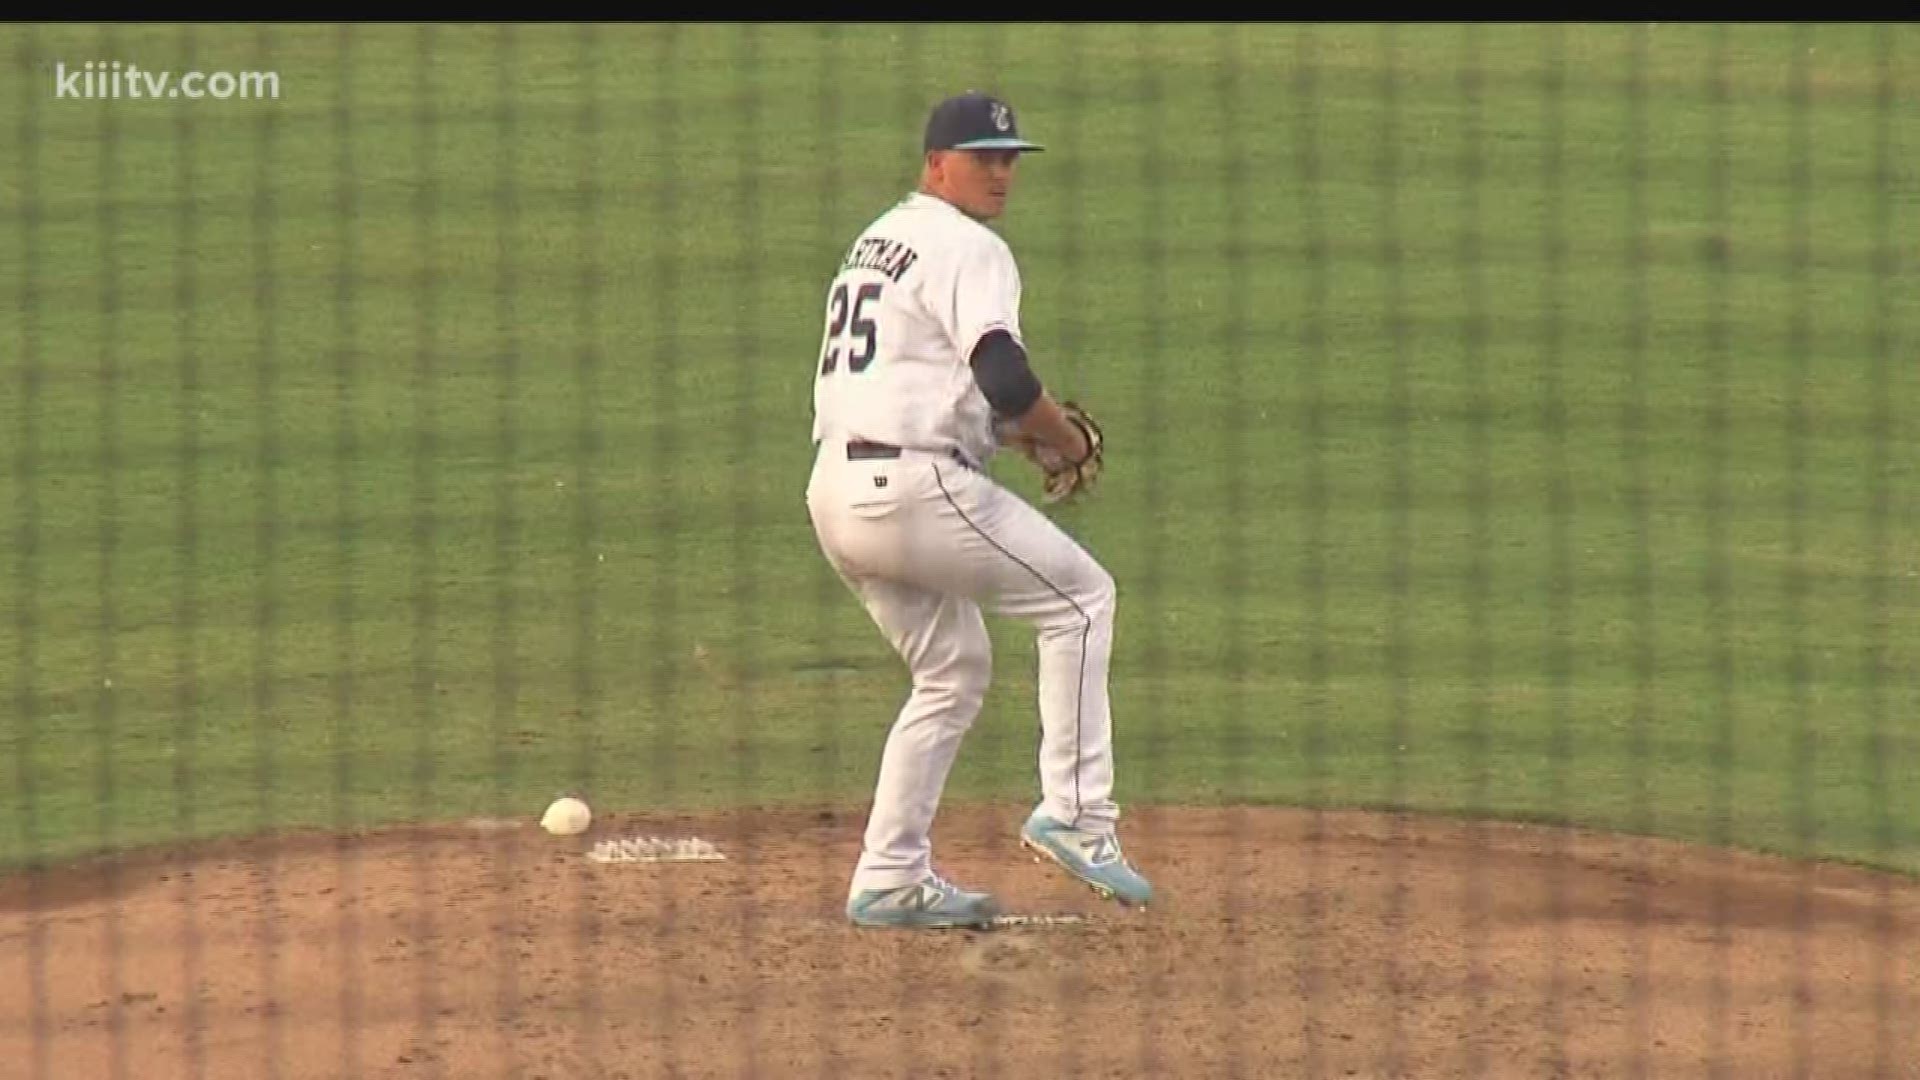 It took 10 innings, but the Corpus Christi Hooks closed out their homestand against the San Antonio Missions with a 3-2 win. The win marks the Hooks fifth consecutive win and completes a three-game sweep of the Missions. 